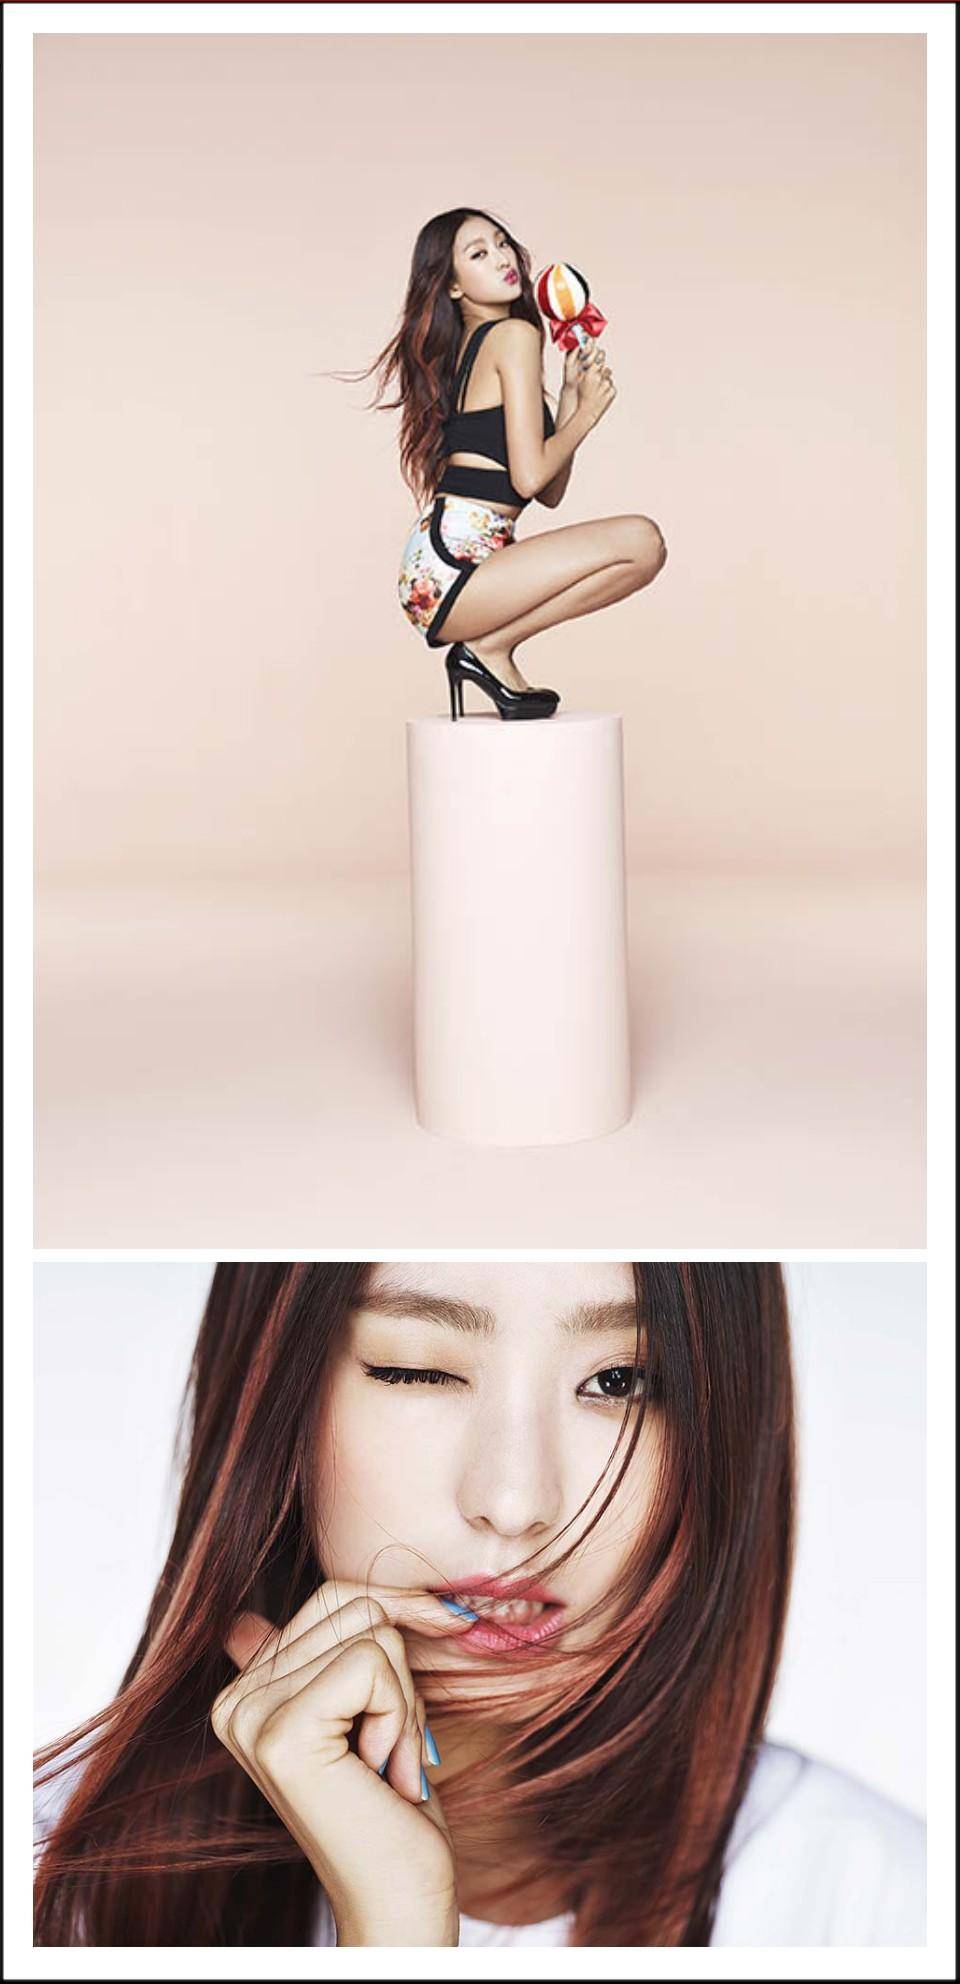 Bora is the next sexy sistar member to release individual touch my body images